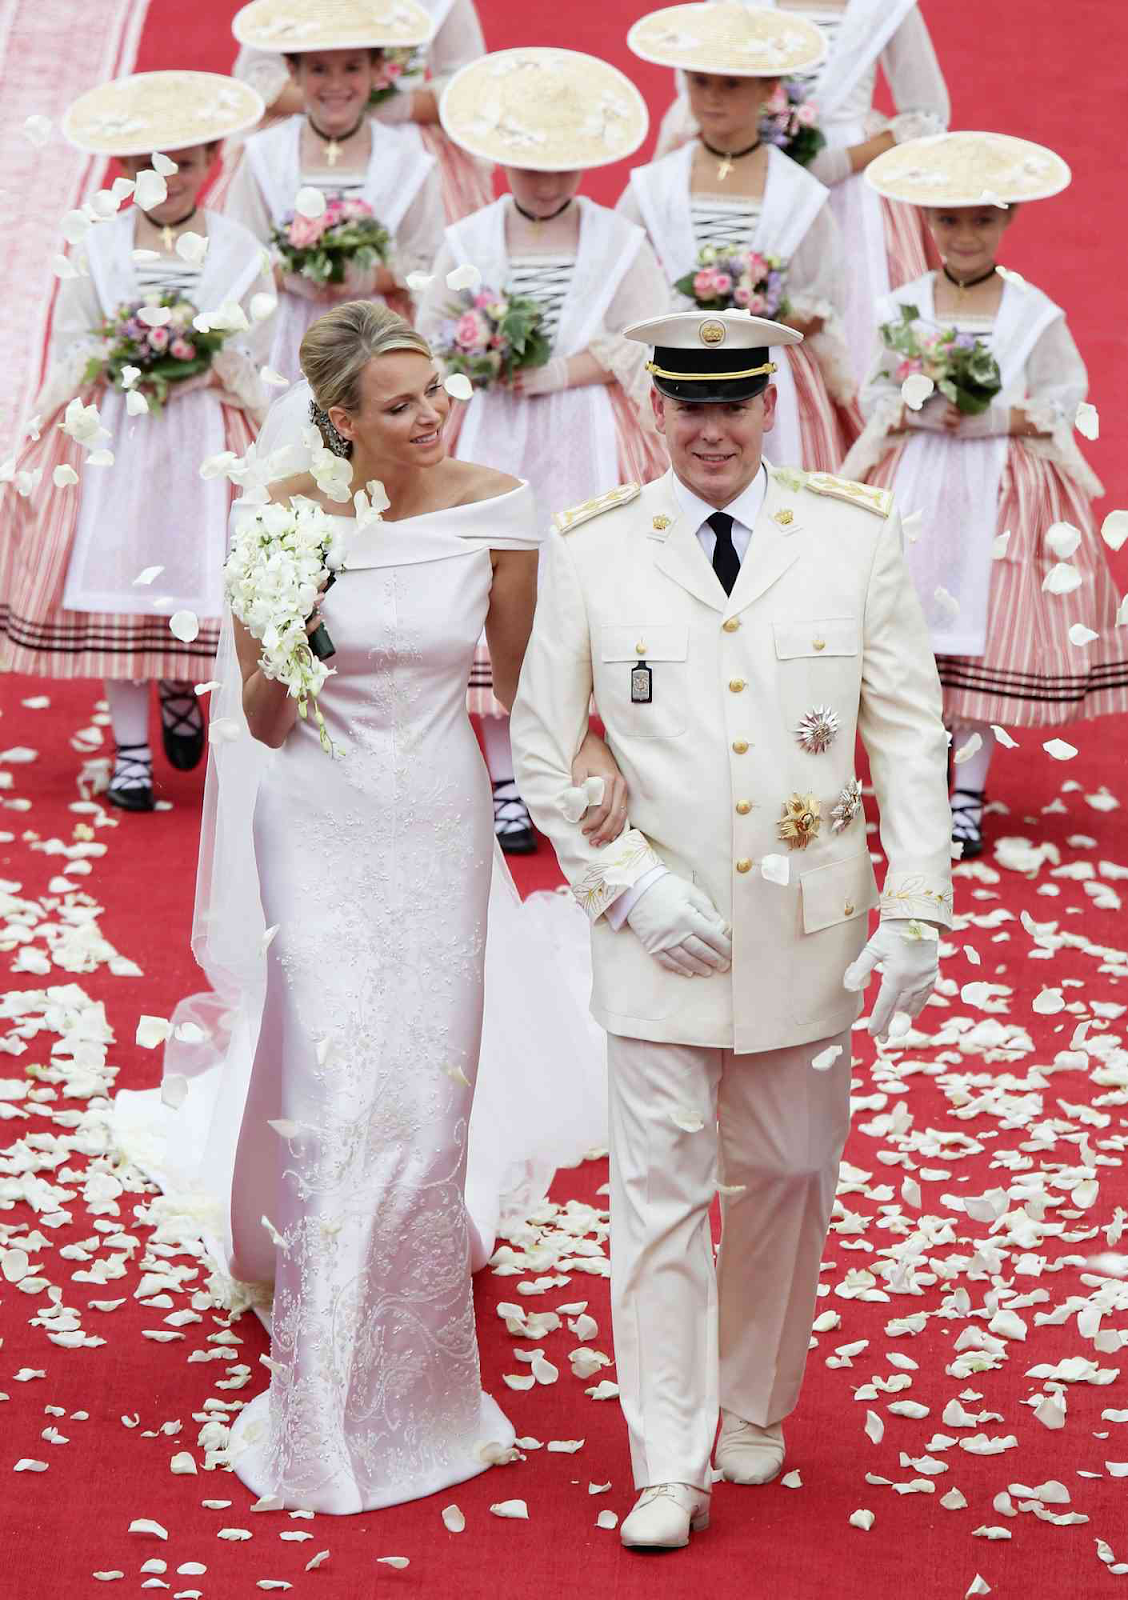 Top 10 Most Expensive Weddings of all Time